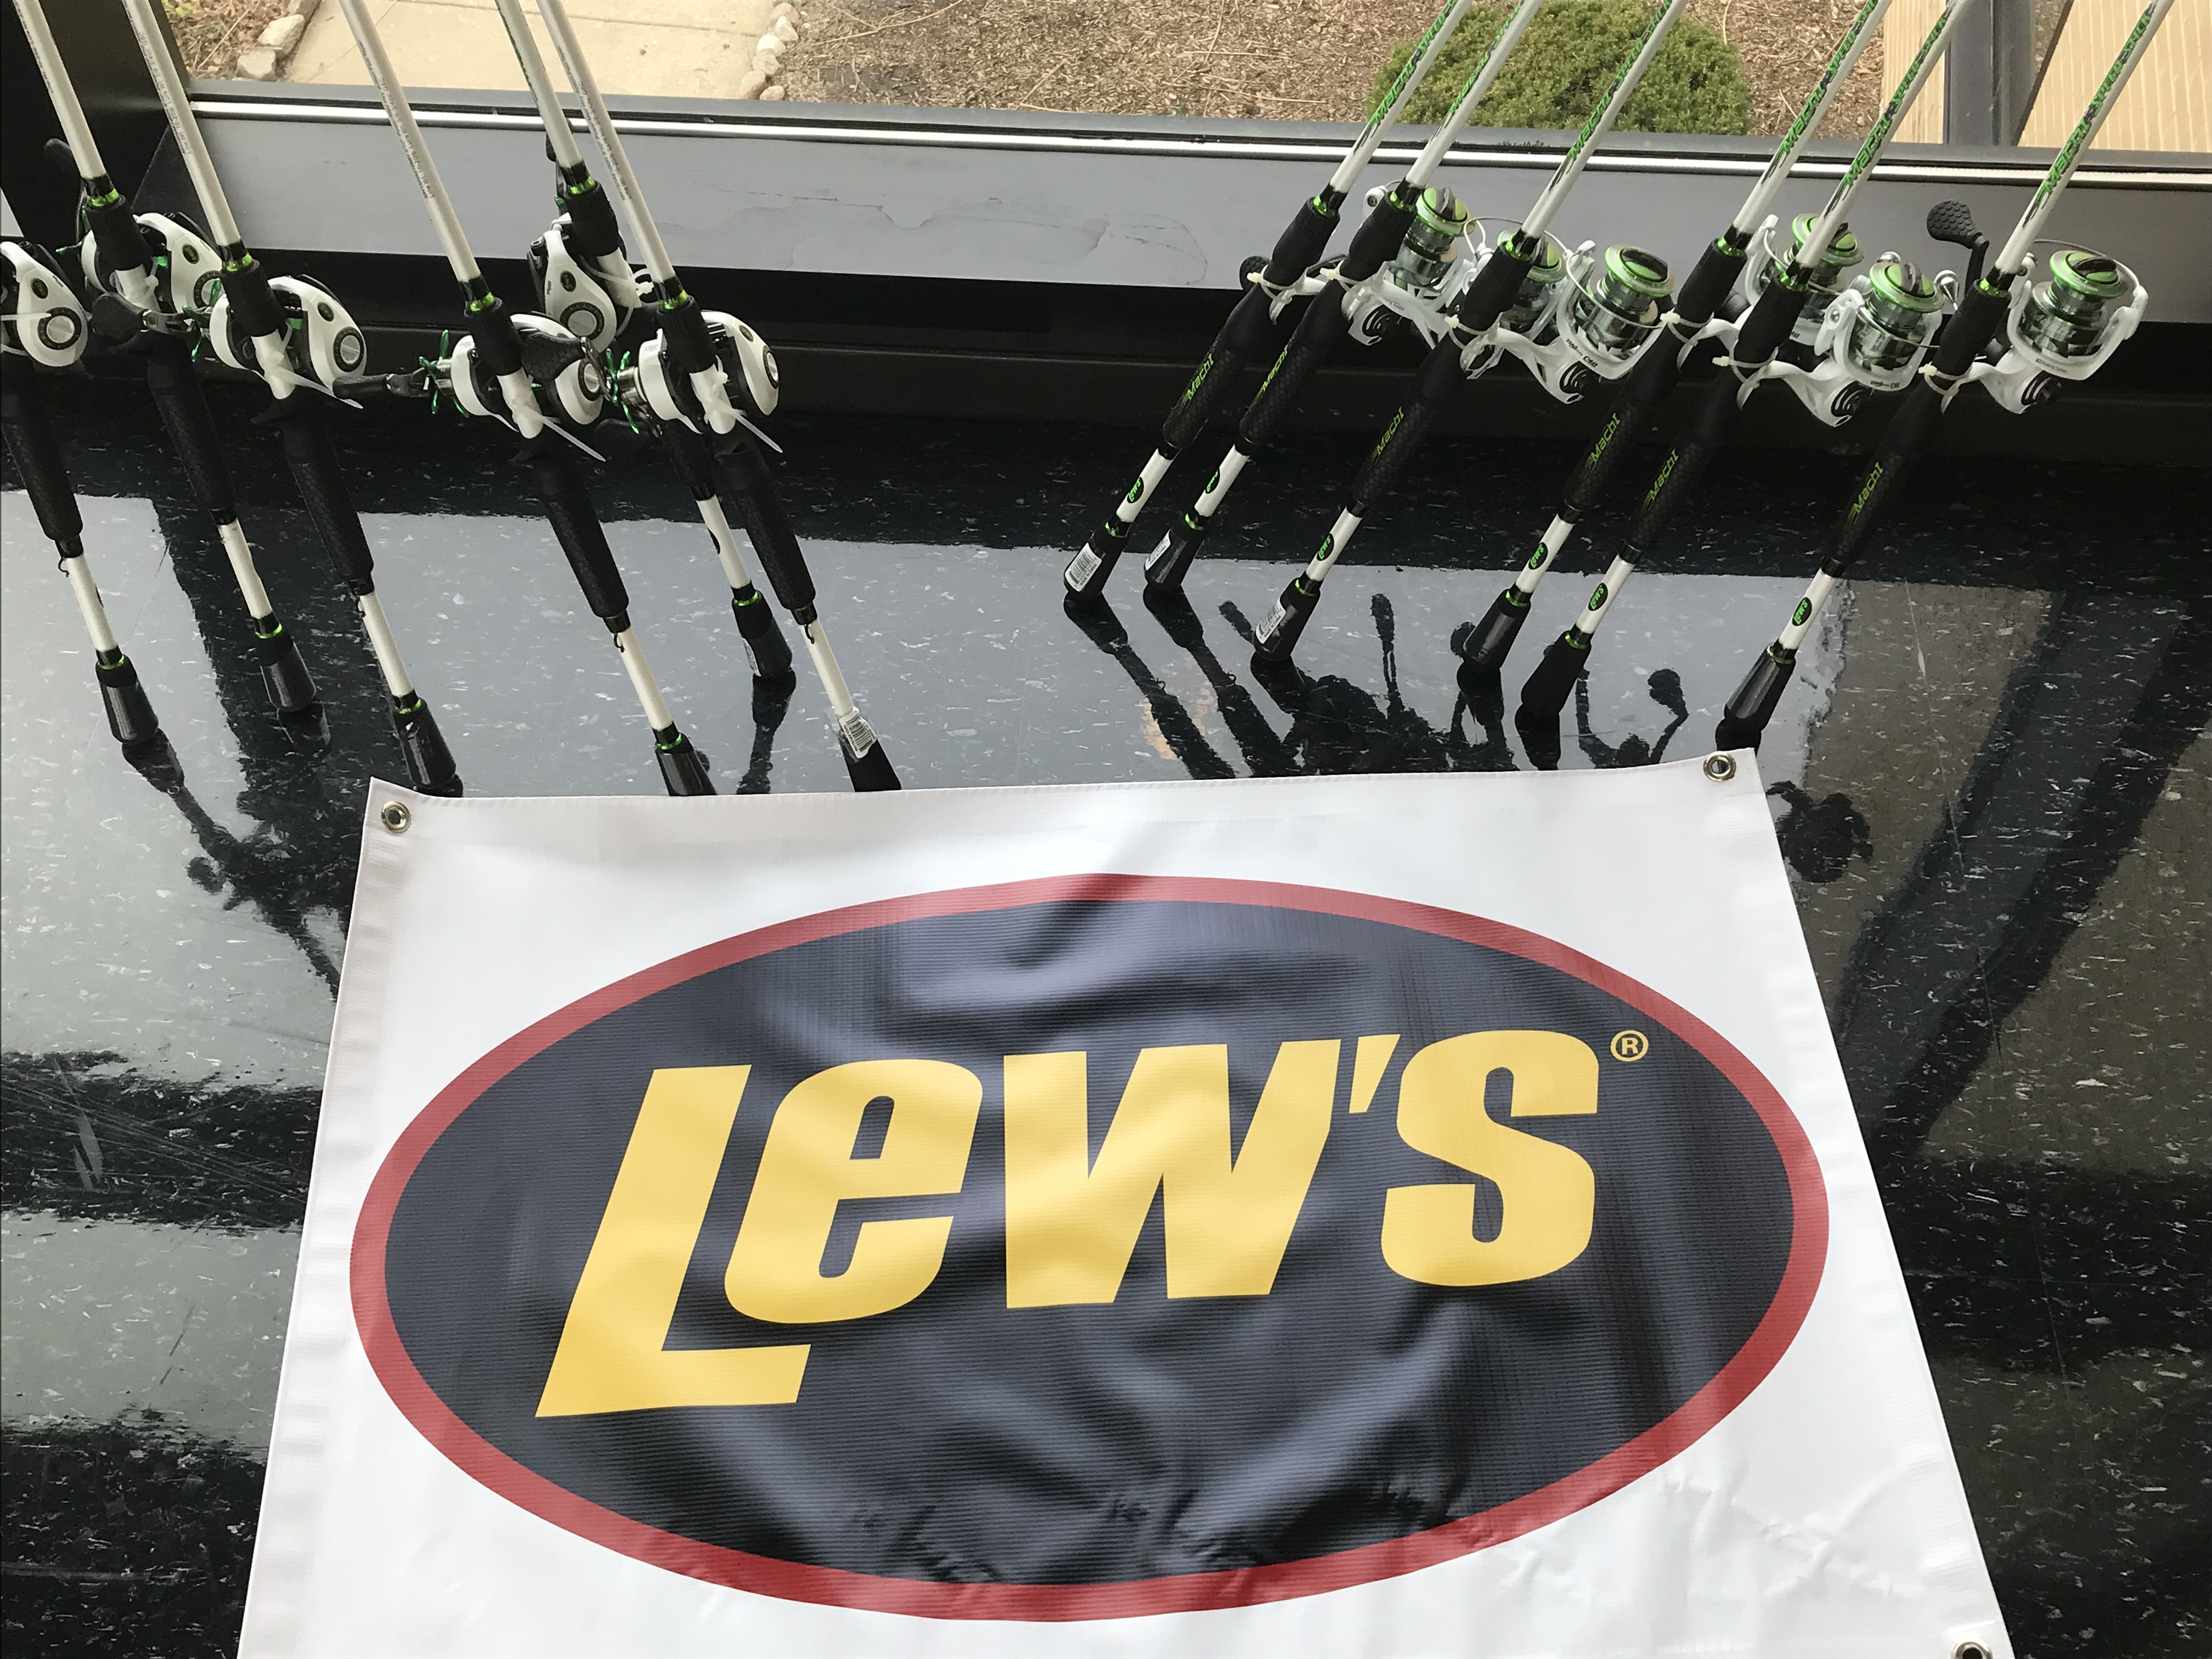 WWS Bass Fishing on X: Our team loves these guys! They're the best! Hope  to catch some big fish with these amazing rods and reels! #lews #goteamlews   / X